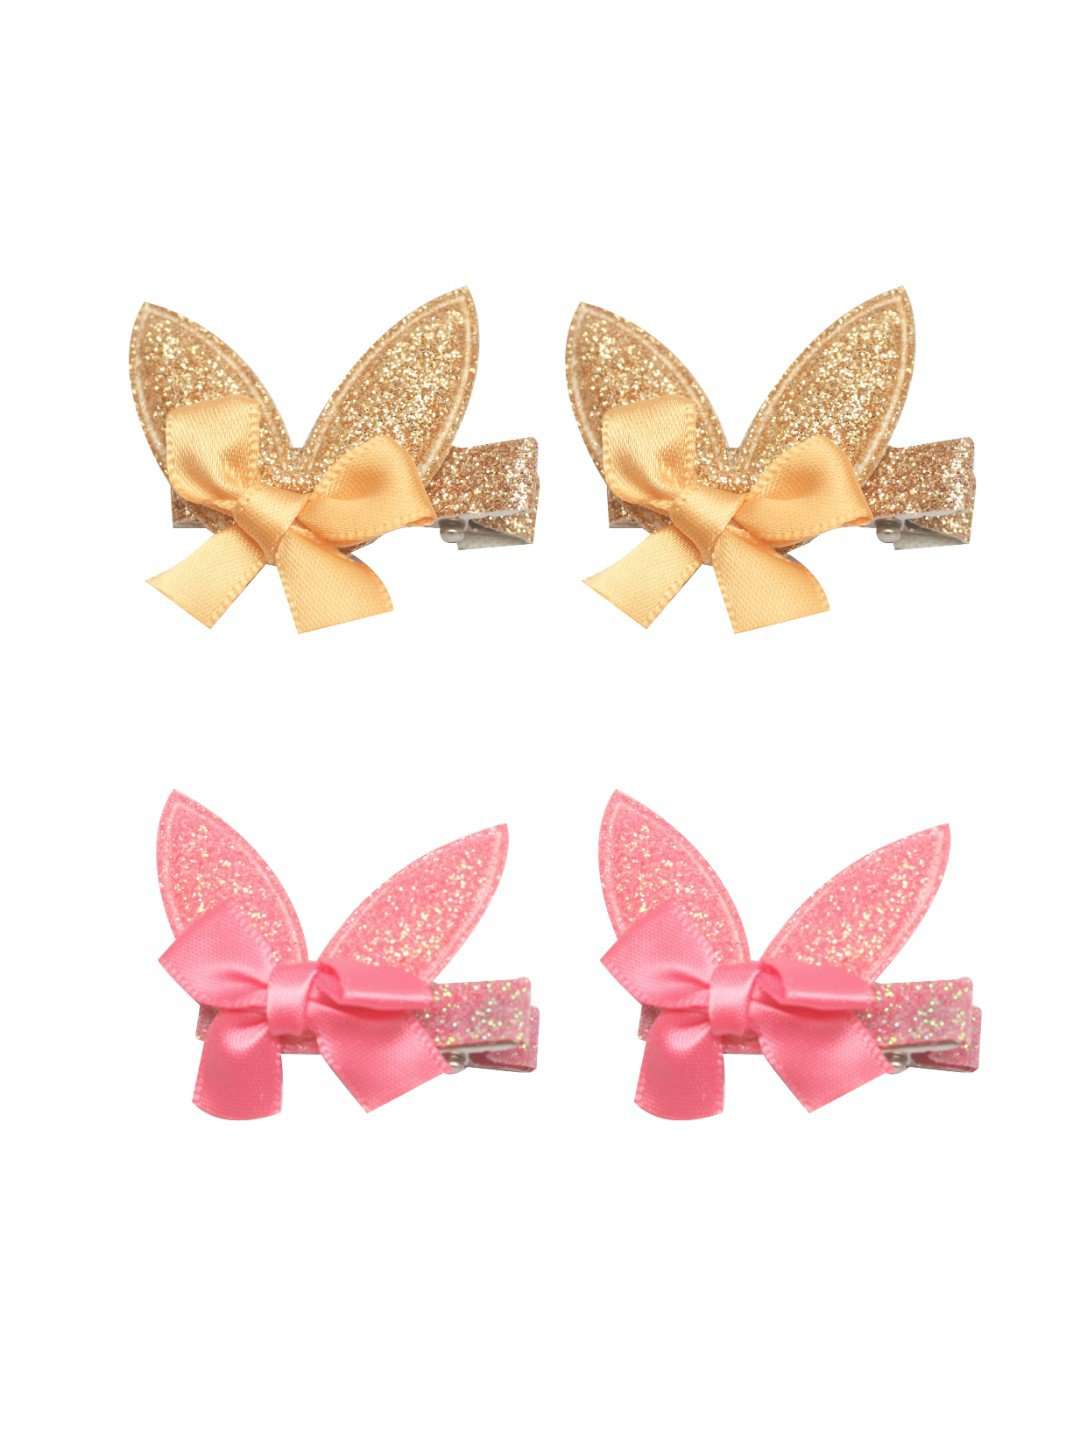 Stol'n Set of Gold and Dark Pink Shiny Bunny Clip :Gold and Dark Pink - SWHF